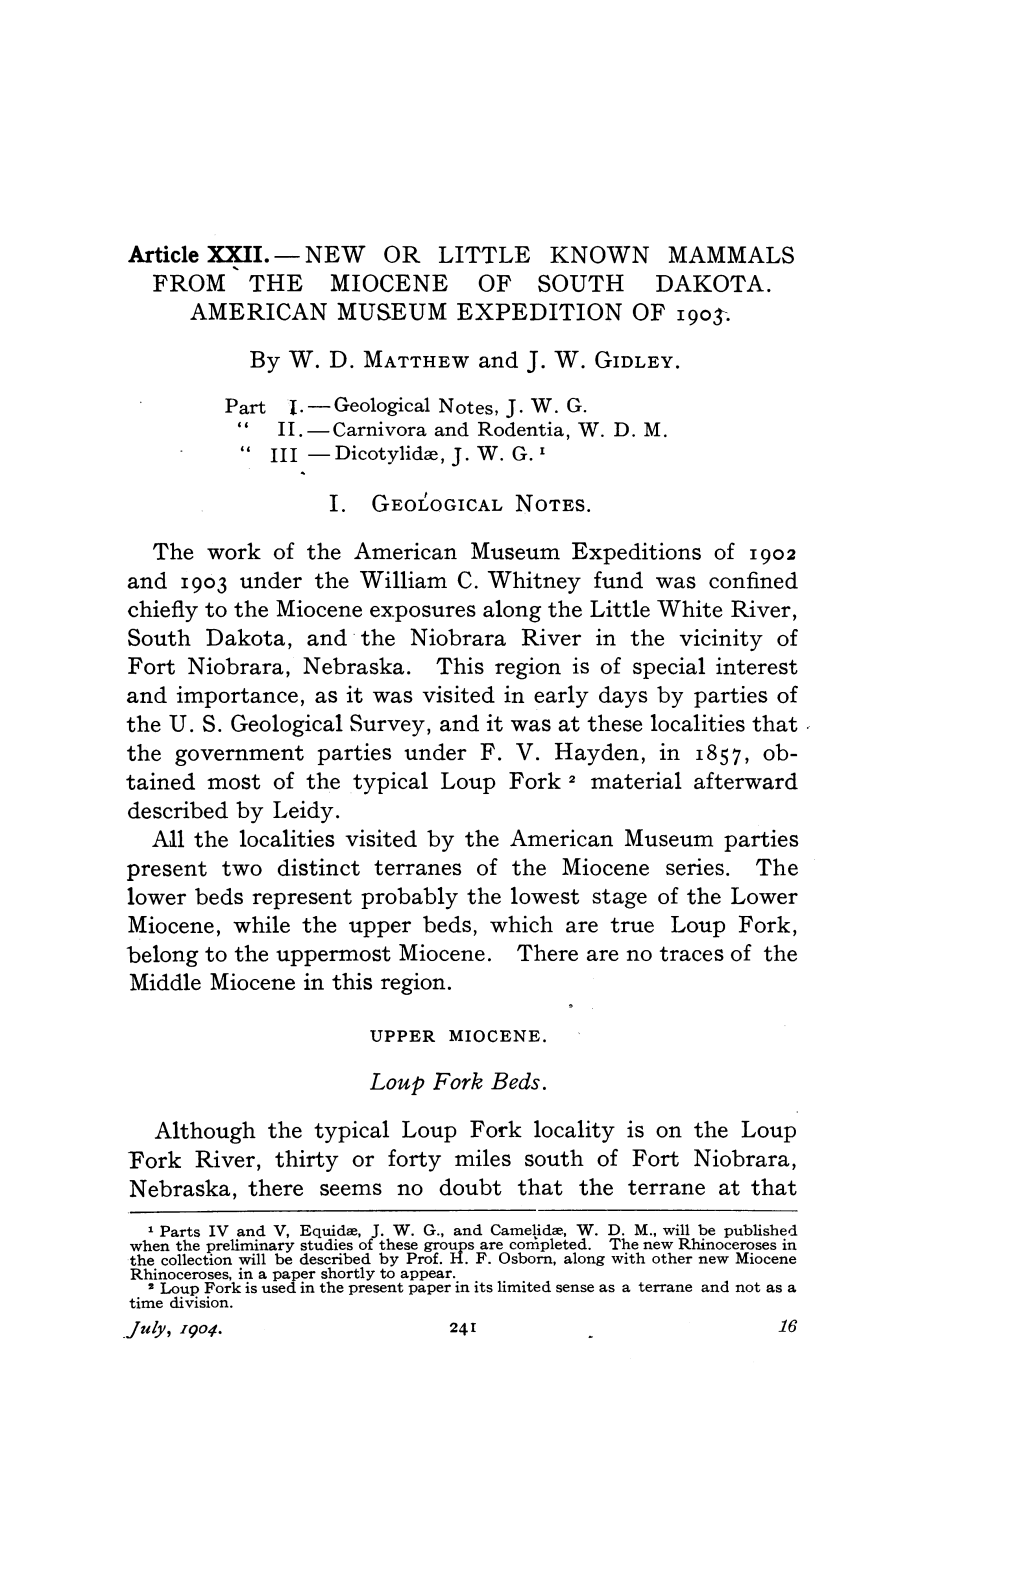 The Work of the American Museum Expeditions of 1902 the U. S